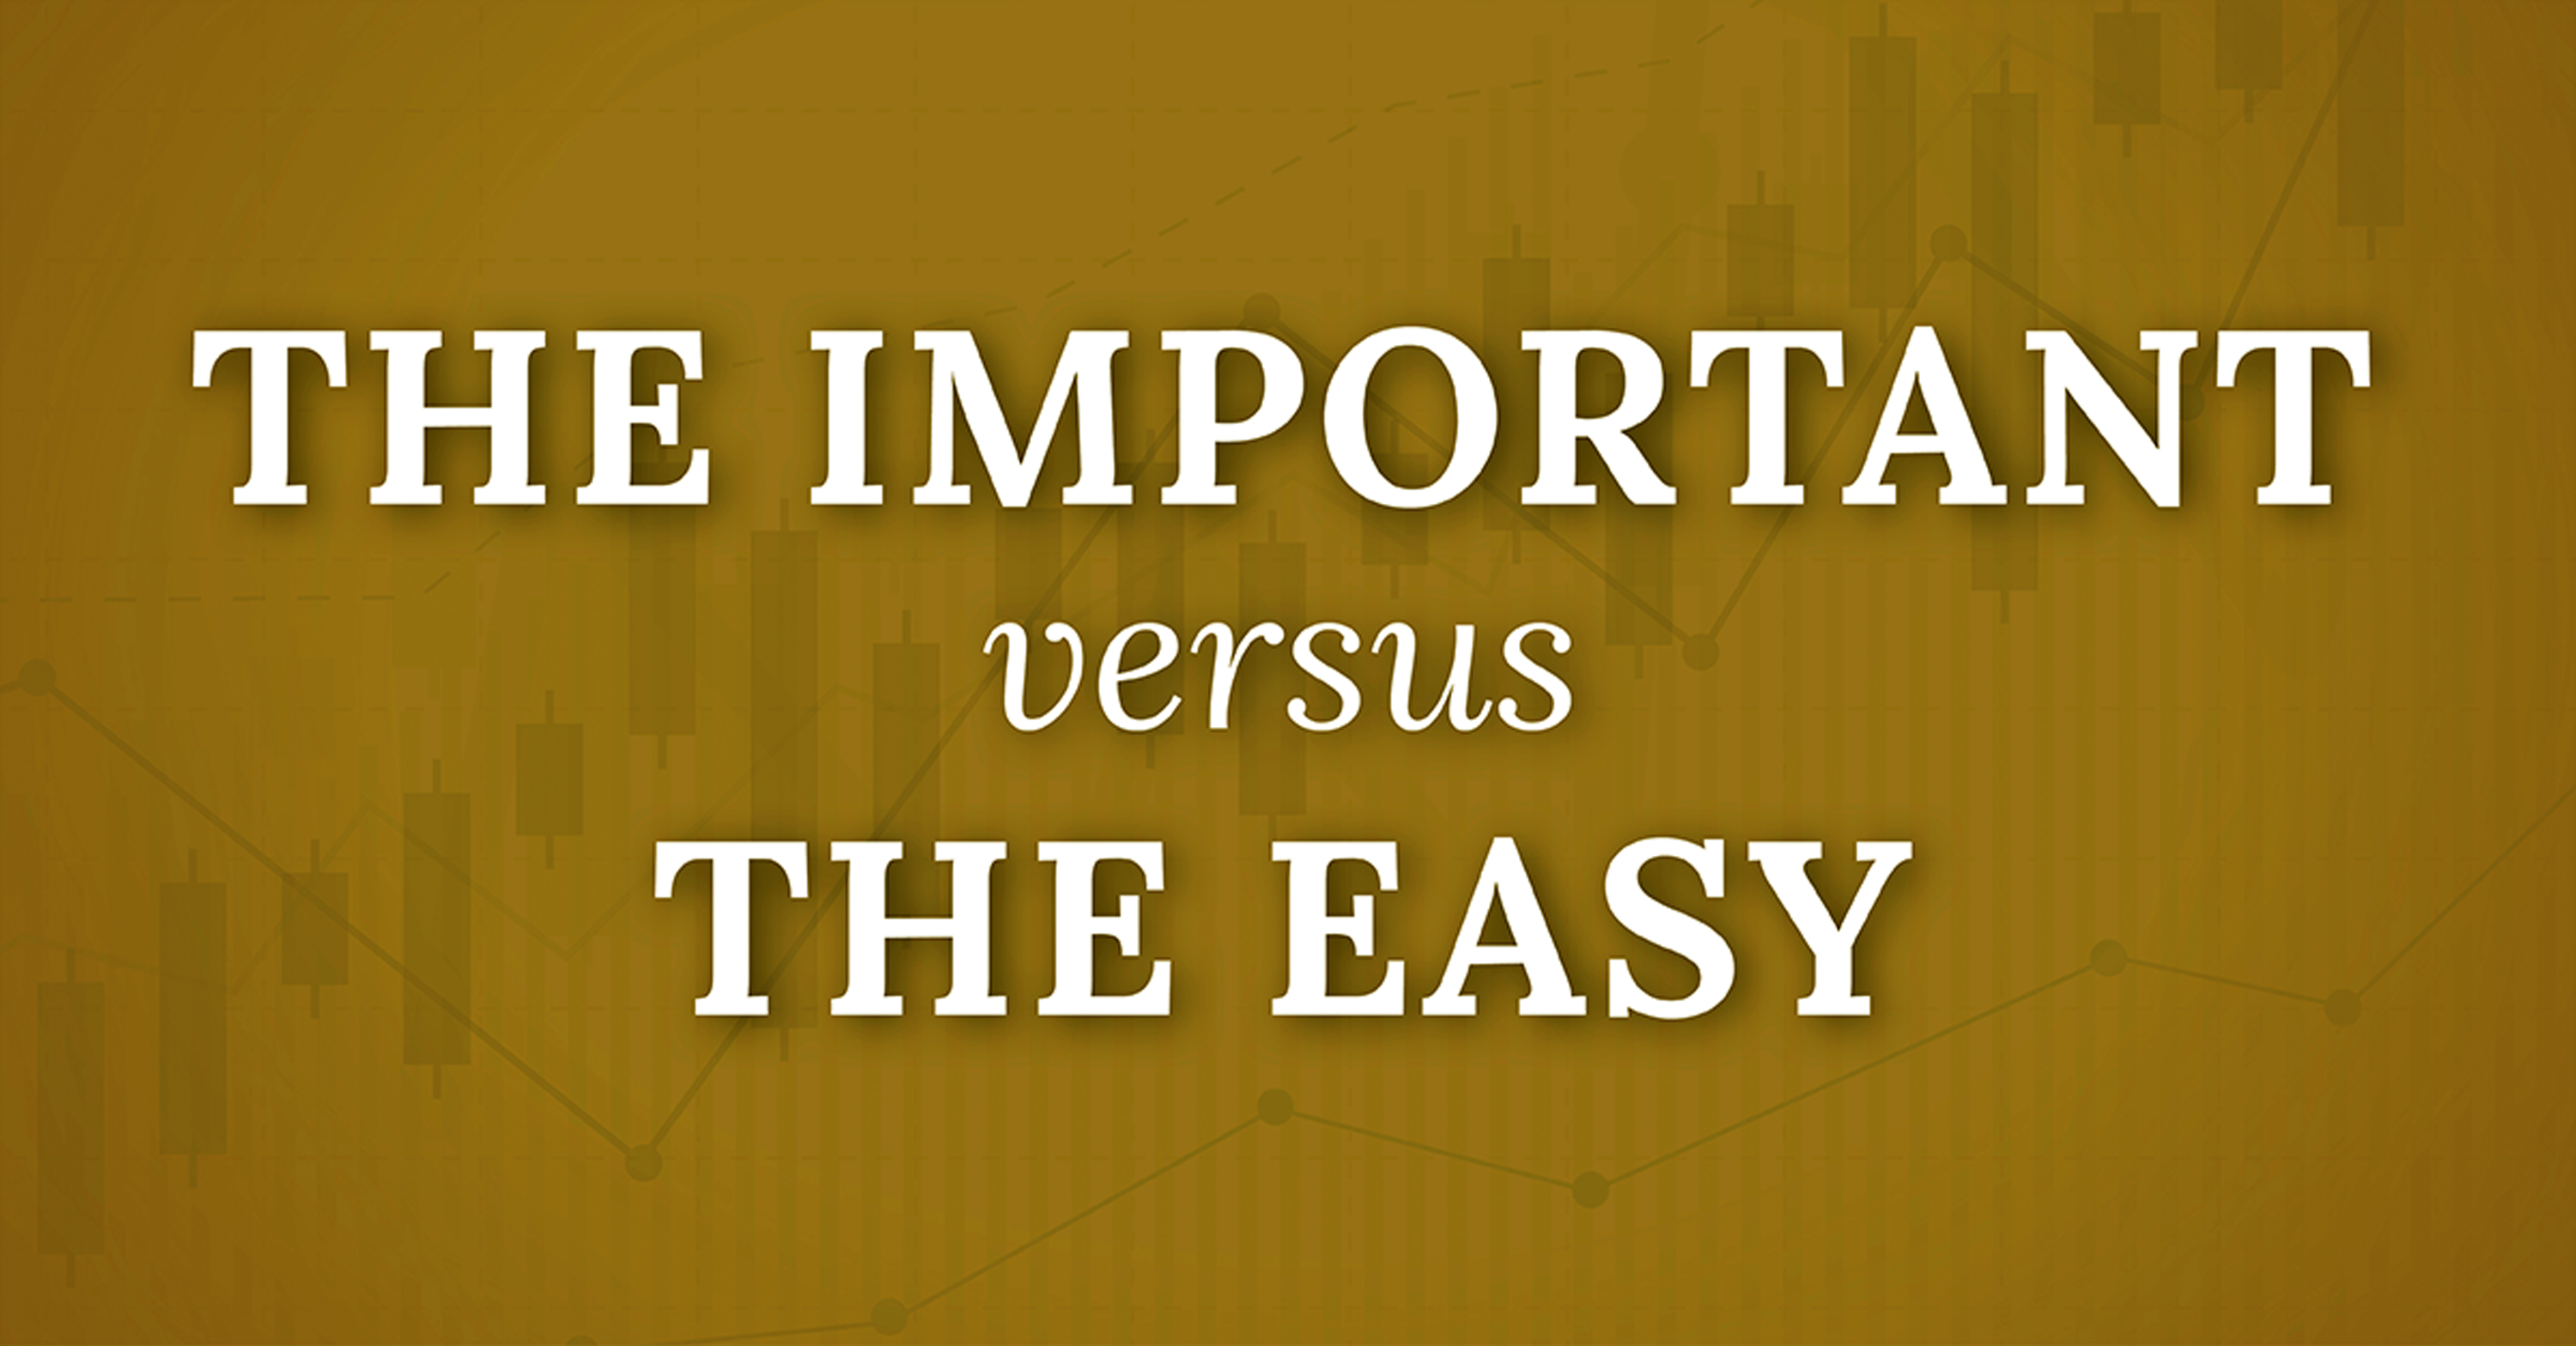 The Important versus the Easy